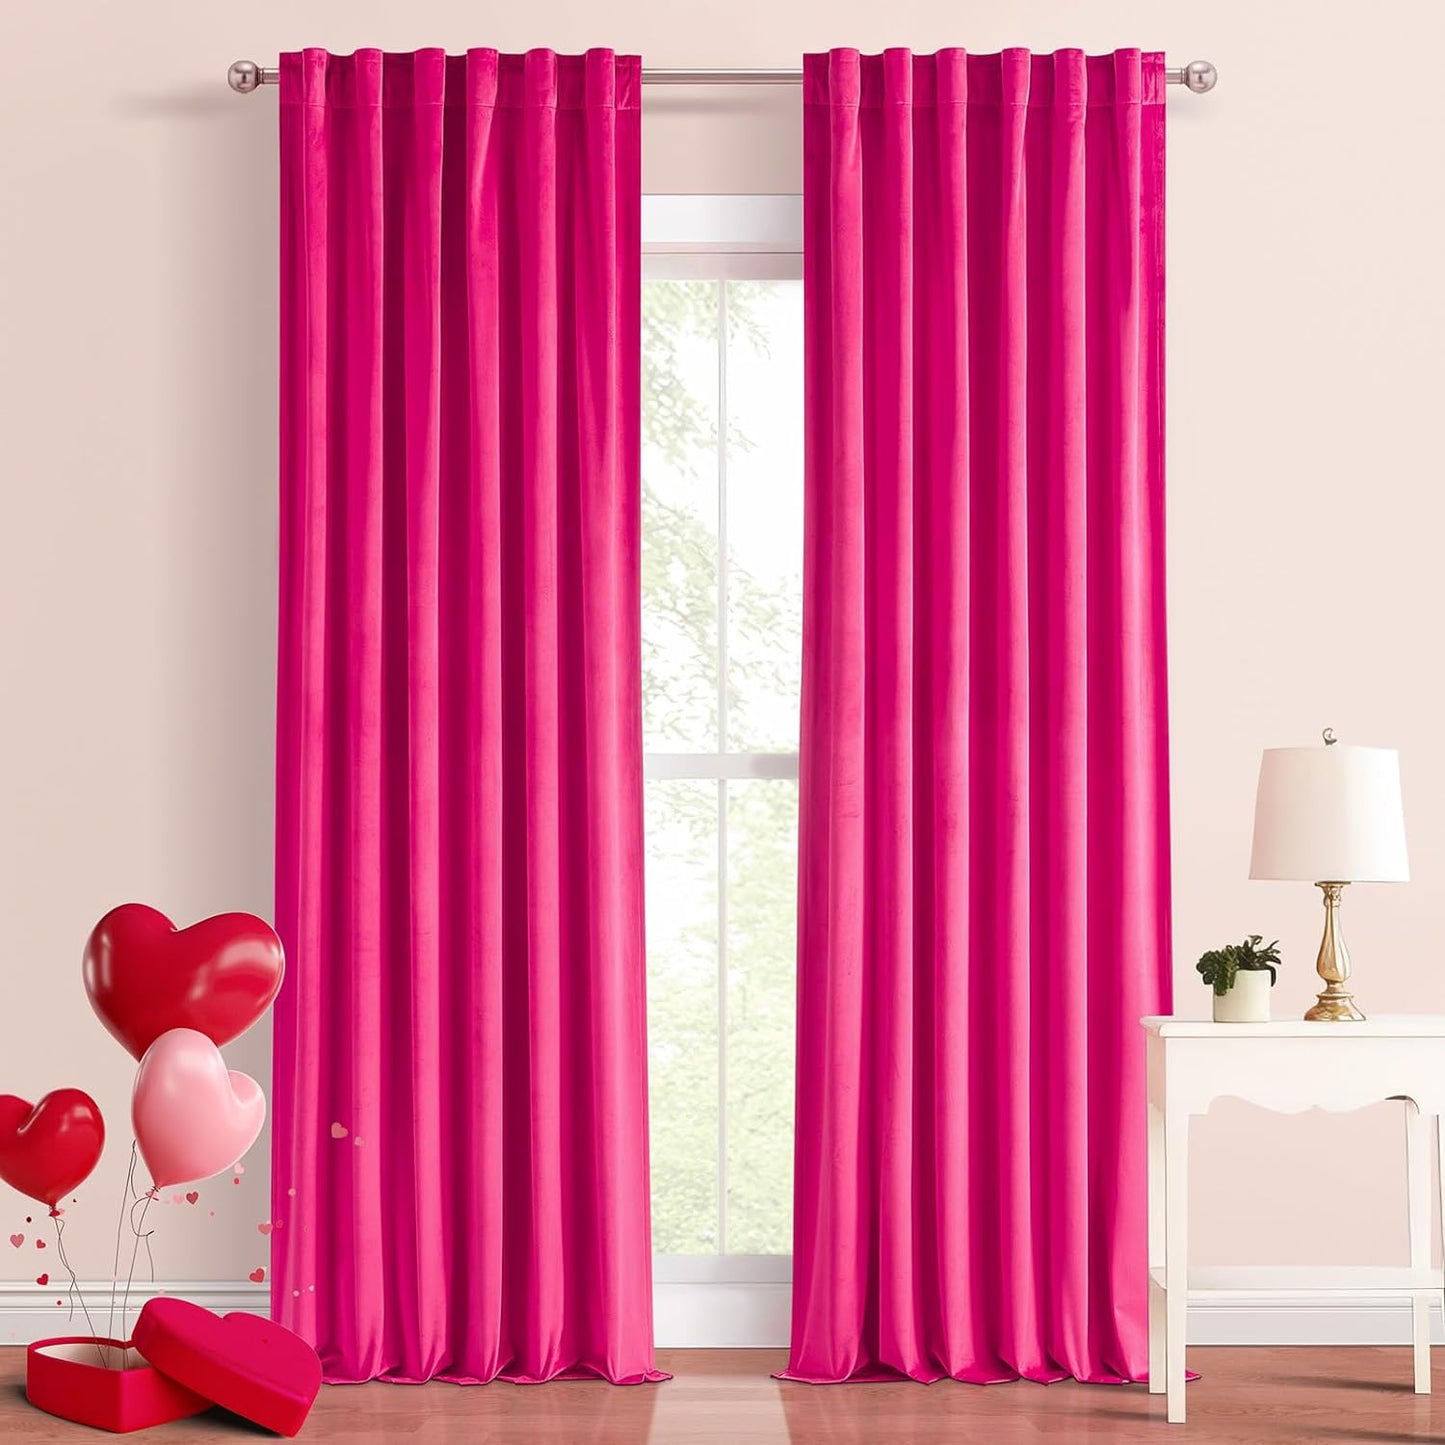 Topfinel Olive Green Velvet Curtains 84 Inches Long for Living Room,Blackout Thermal Insulated Curtains for Bedroom,Back Tab Modern Window Treatment for Living Room,52X84 Inch Length,Olive Green  Top Fine Hot Pink 52" X 84" 